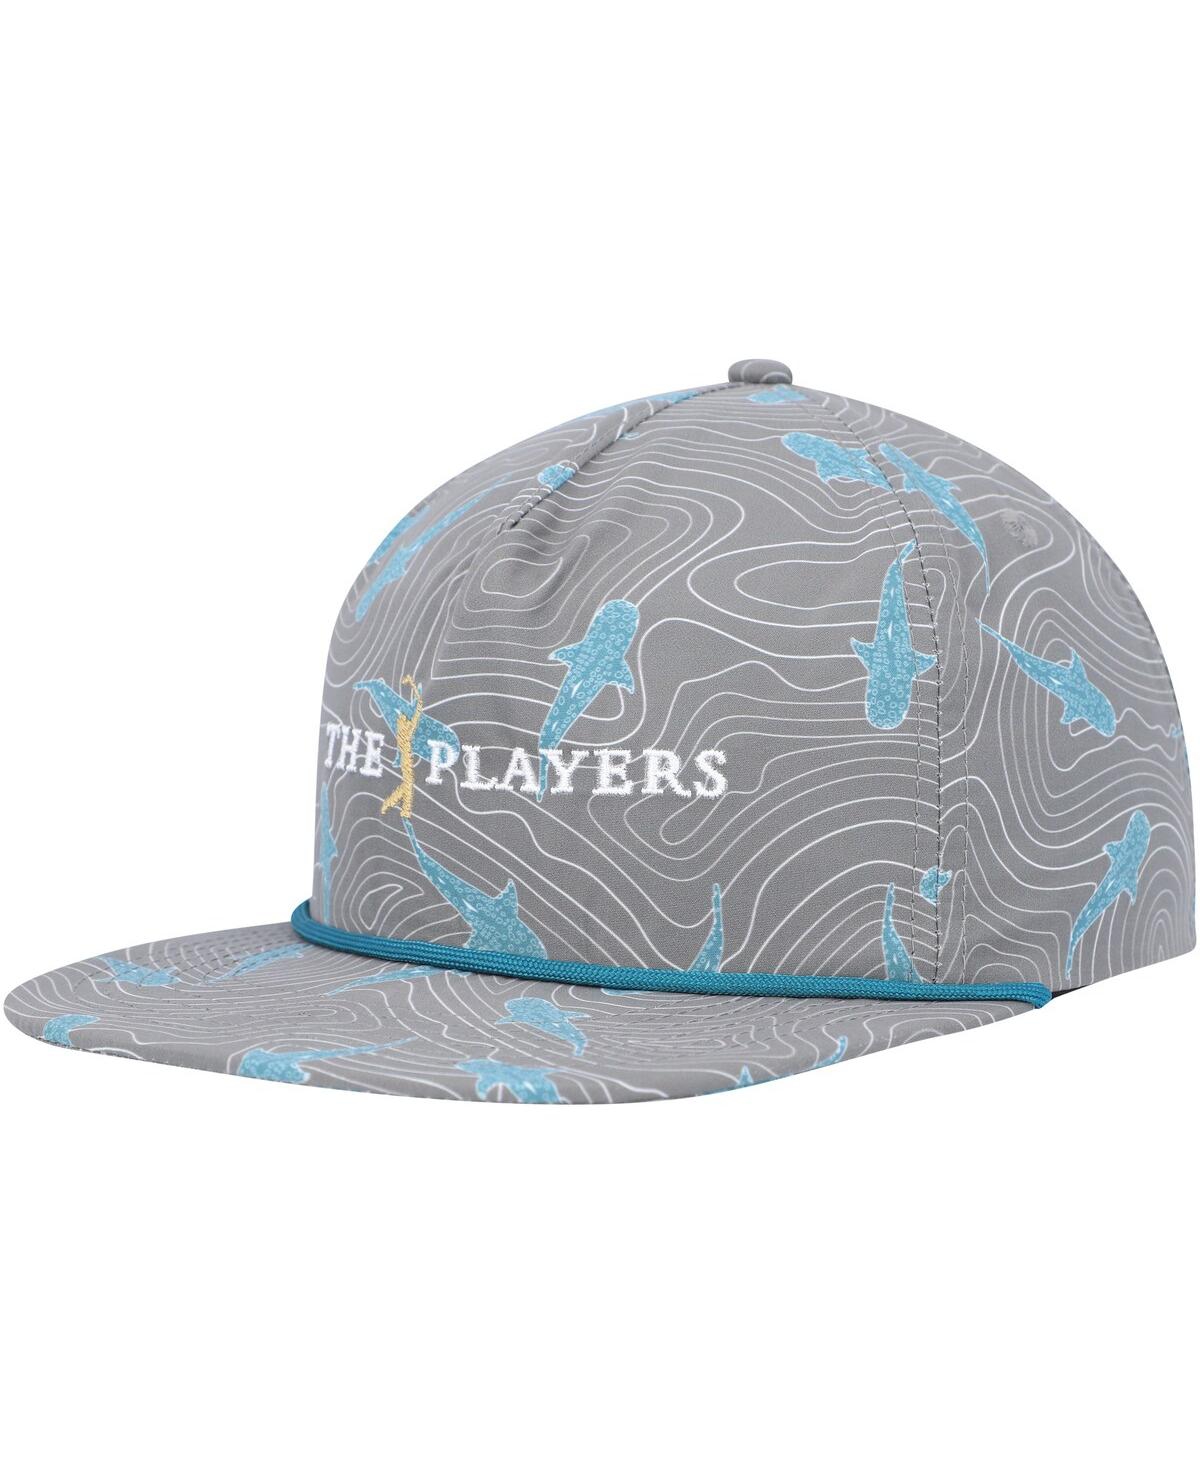 Men's Flomotion Charcoal The Players Sharks Lurking Rope Snapback Hat - Charcoal